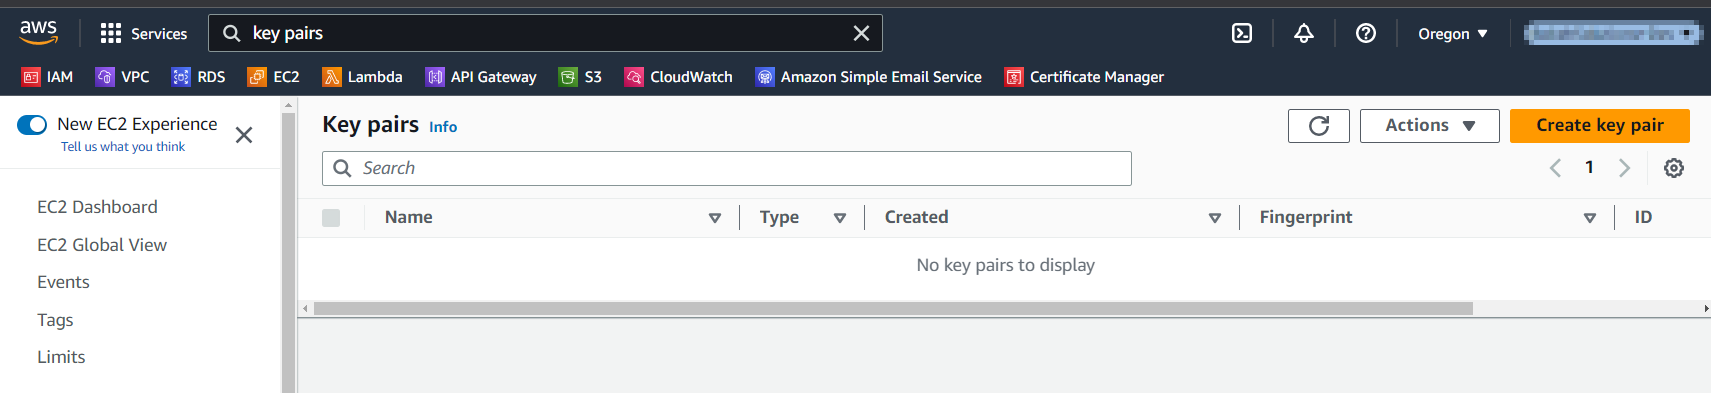 aws_console_key_pairs_create An Introduction to T-POT: The All-in-One Honeypot Solution